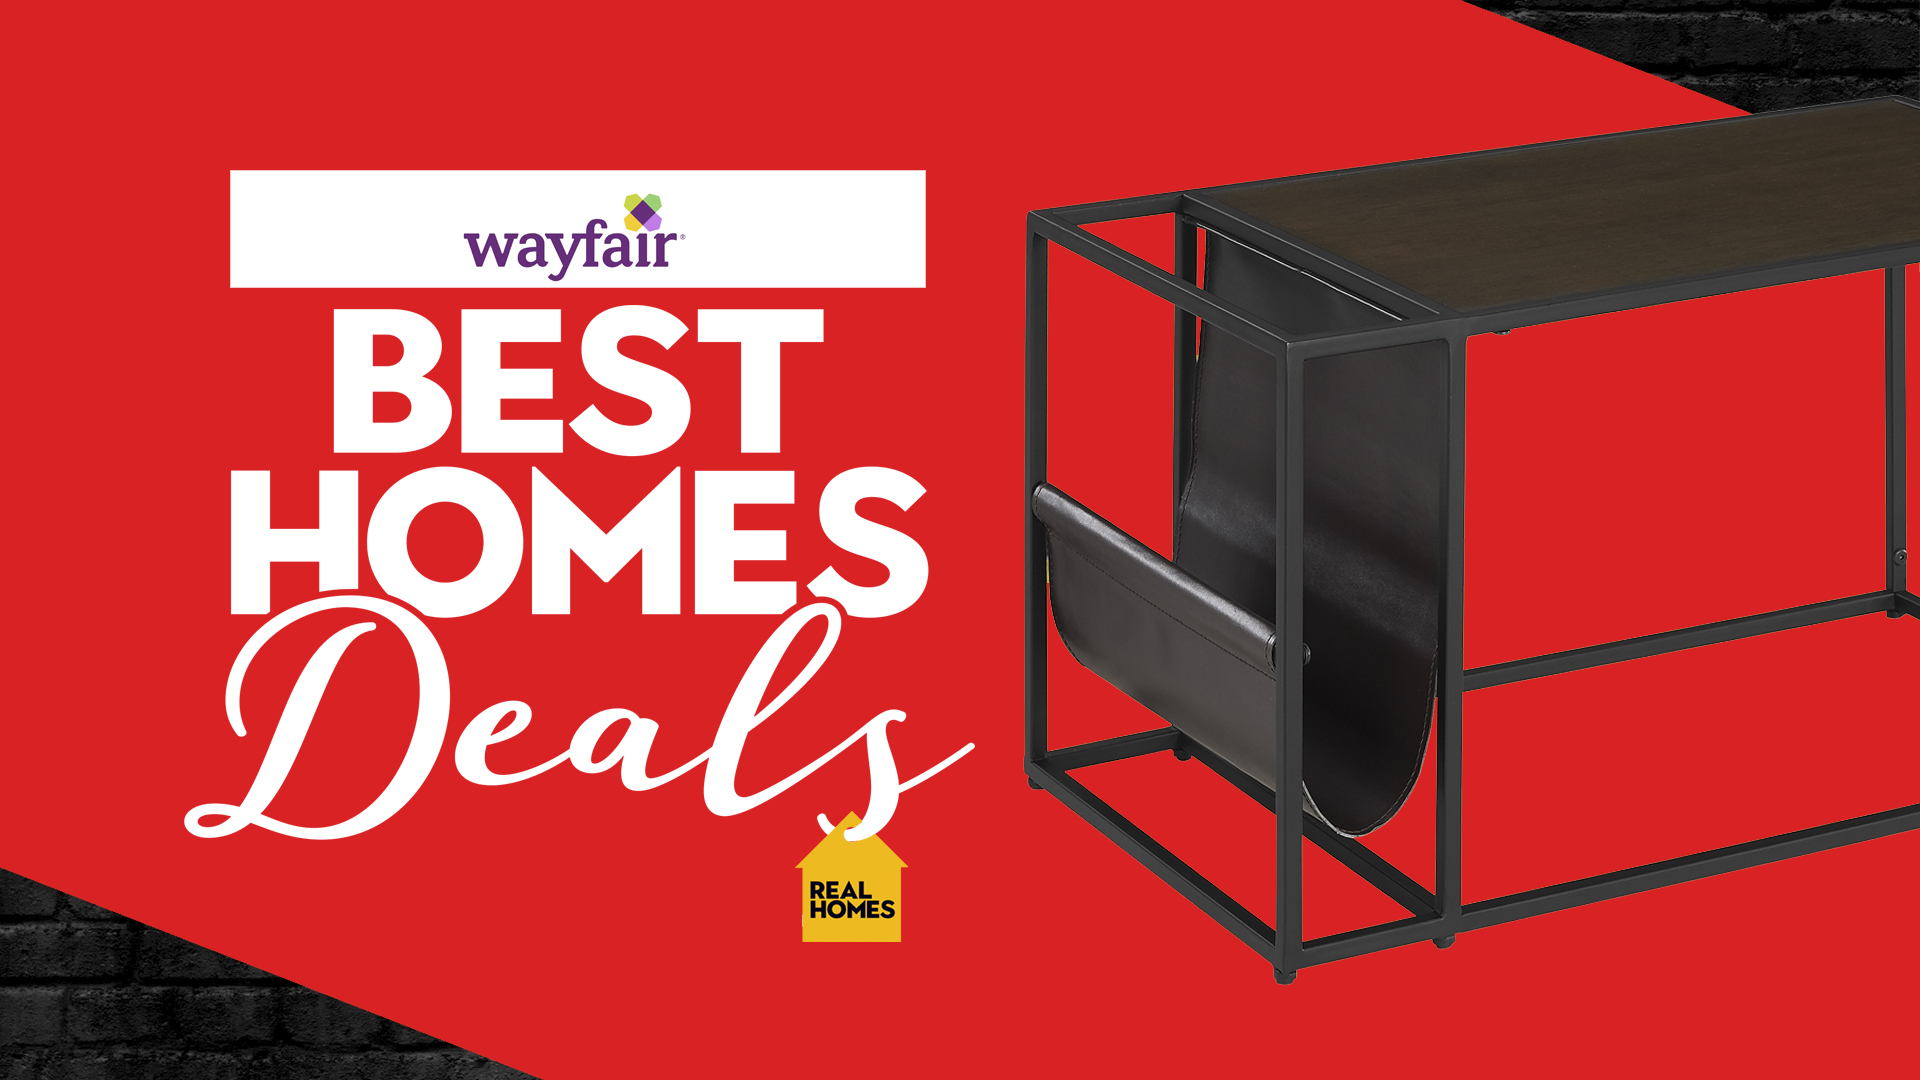 Wayfair sale get brilliant deals and discounts on home buys